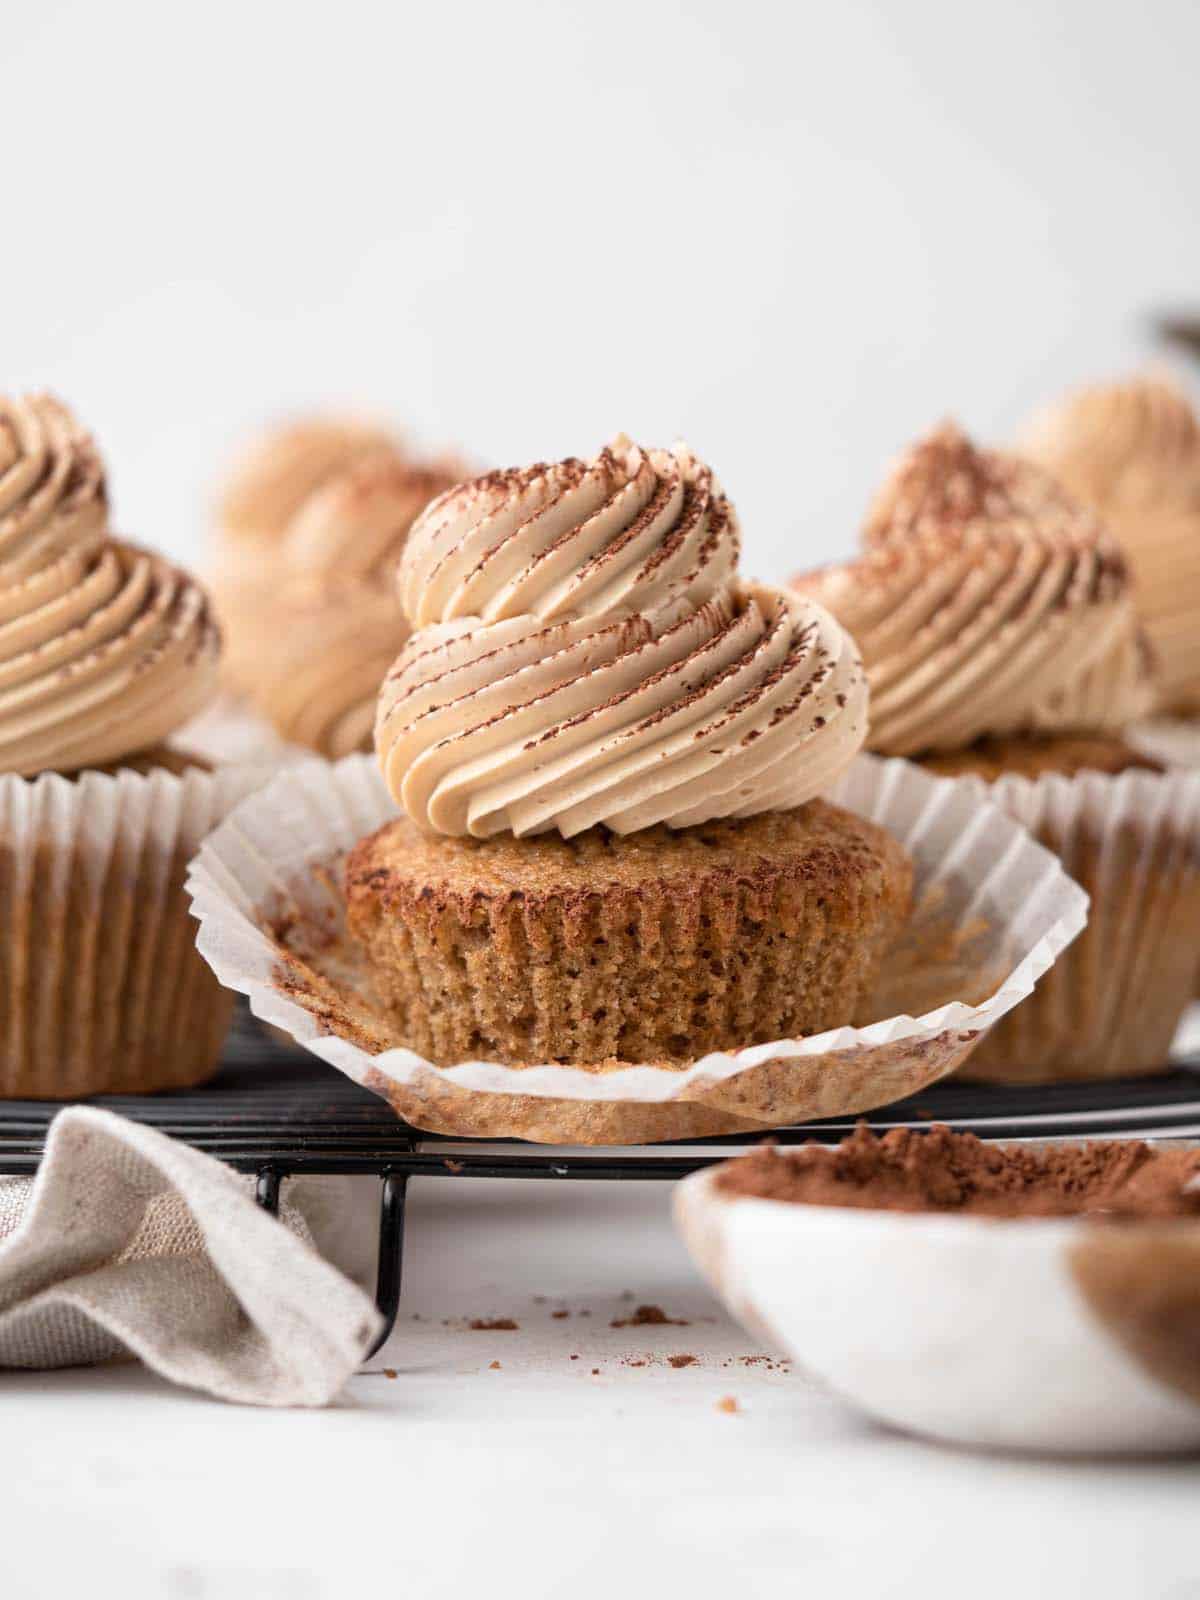 Fluffy espresso cupcakes topped with silky coffee buttercream